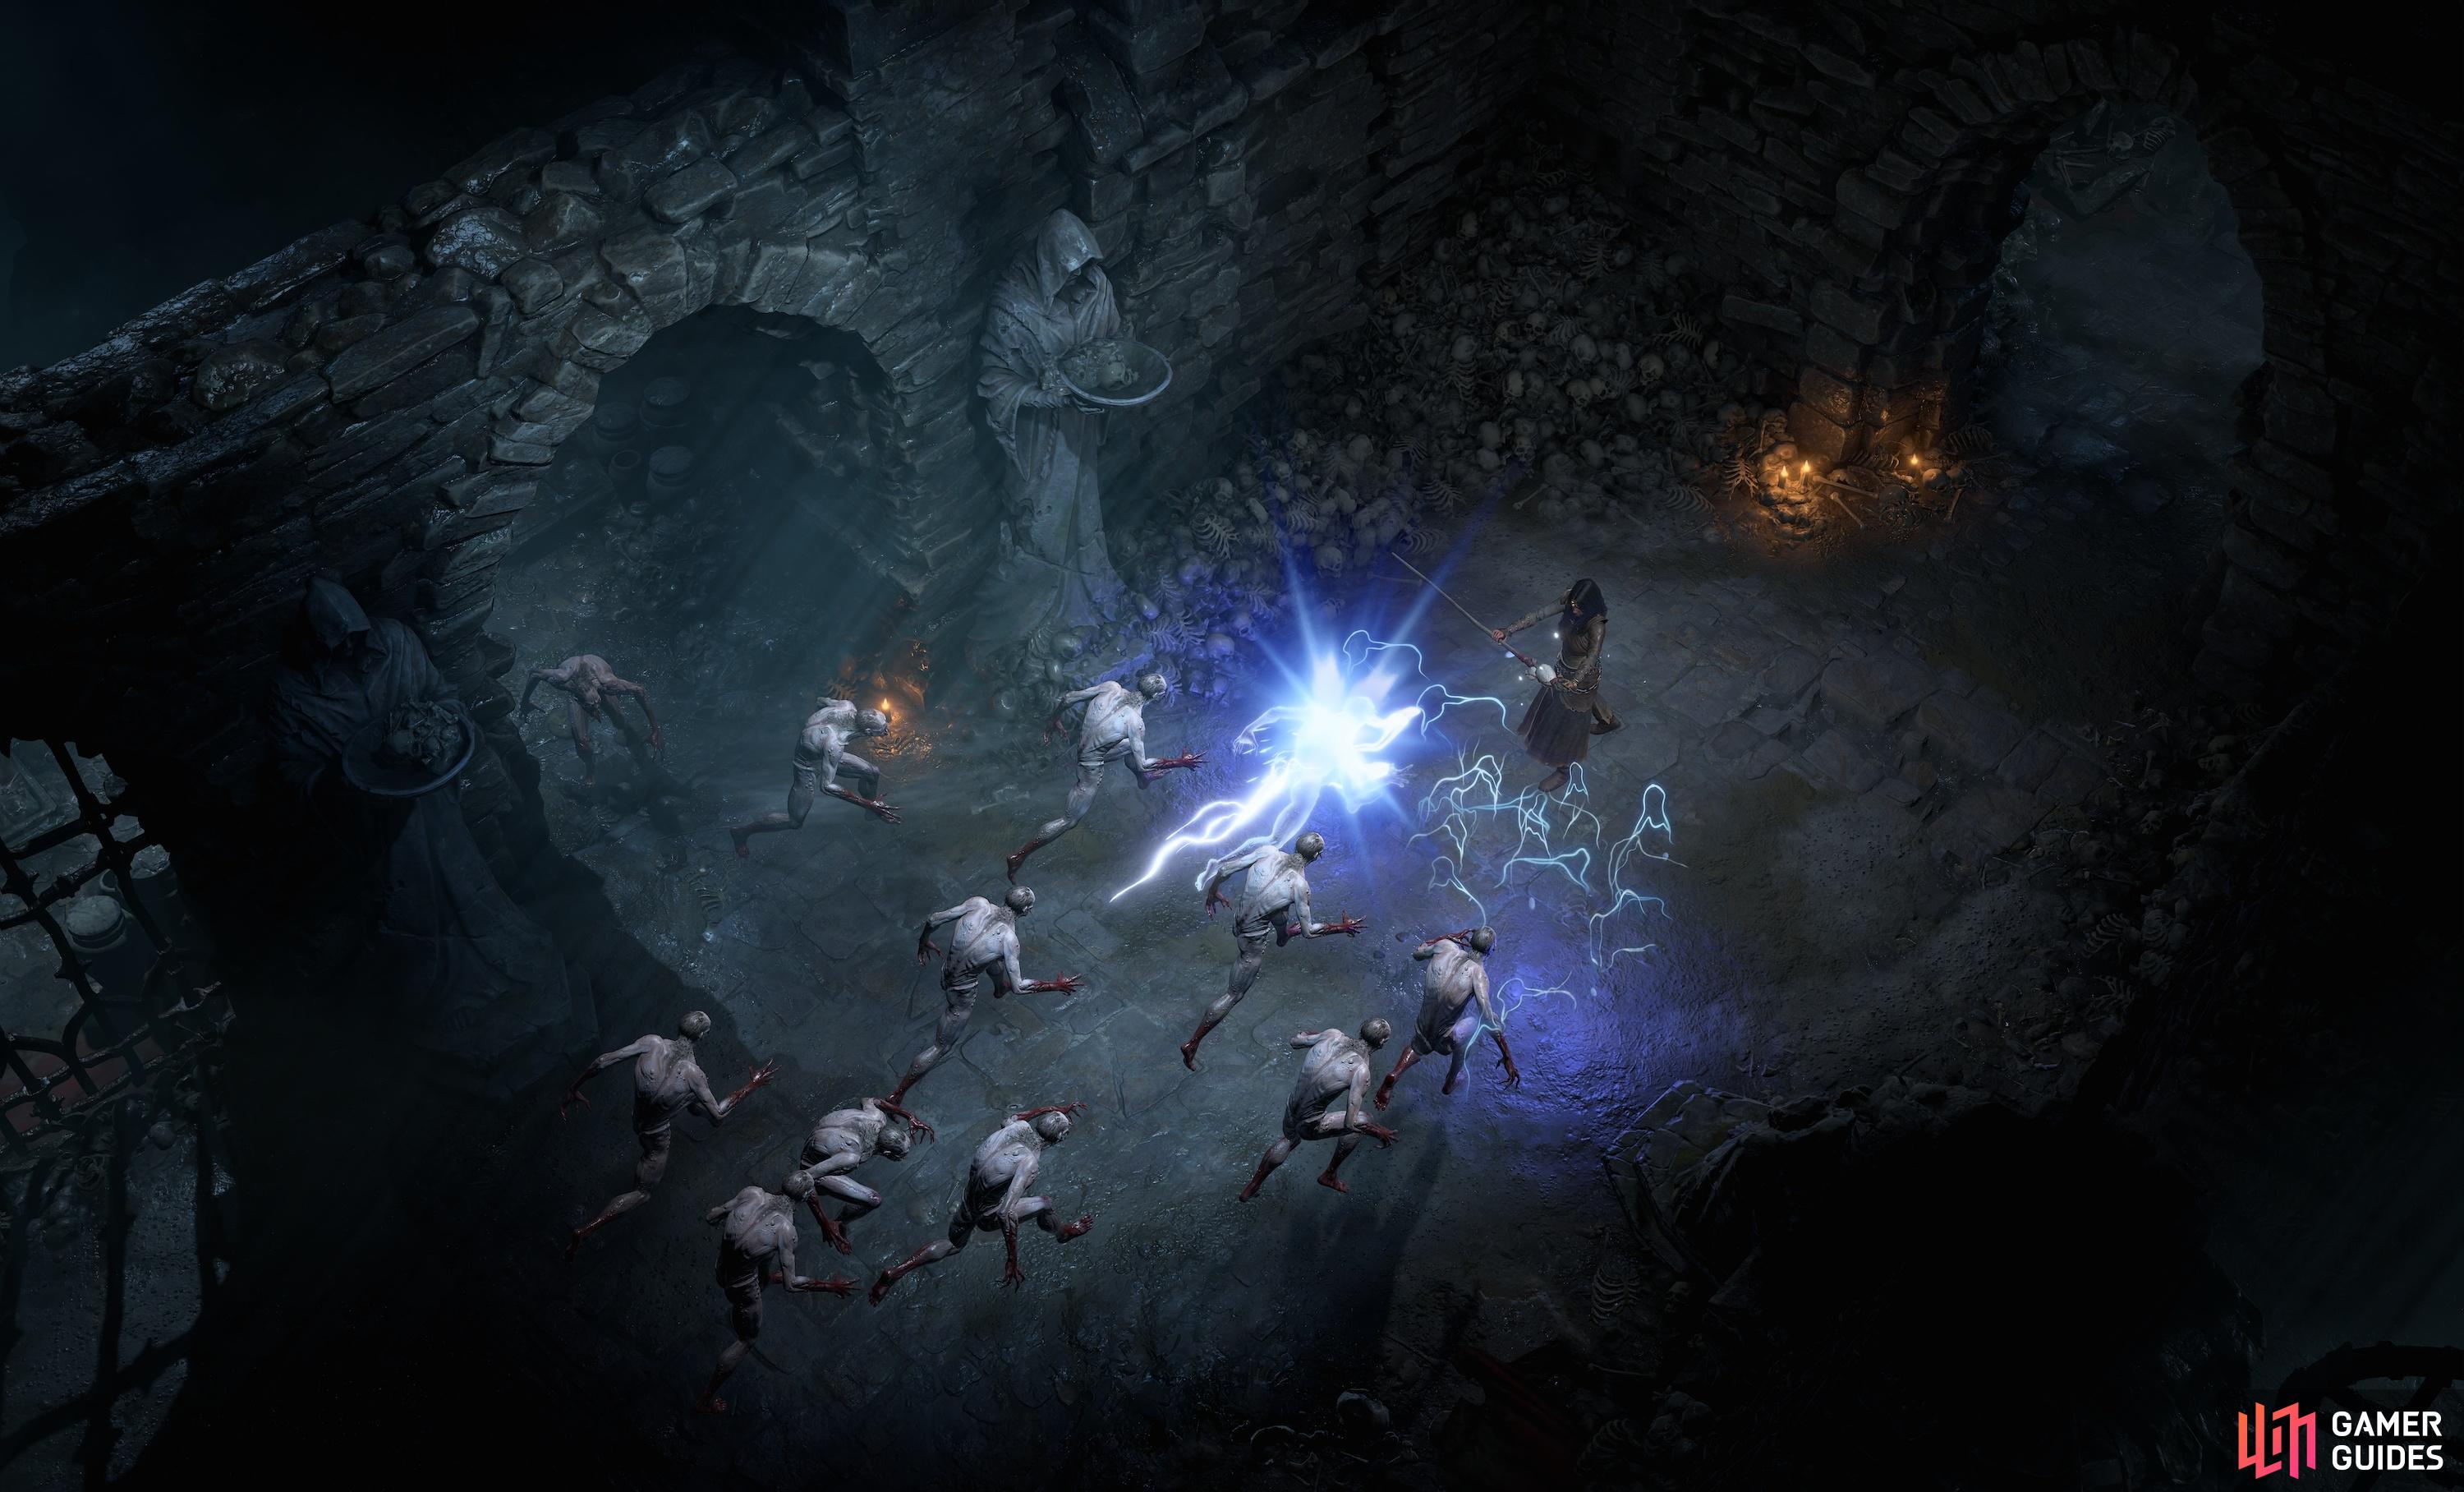 You will need the aid of Potions and Elixirs if you wish to take on the hordes of hell in Diablo 4.